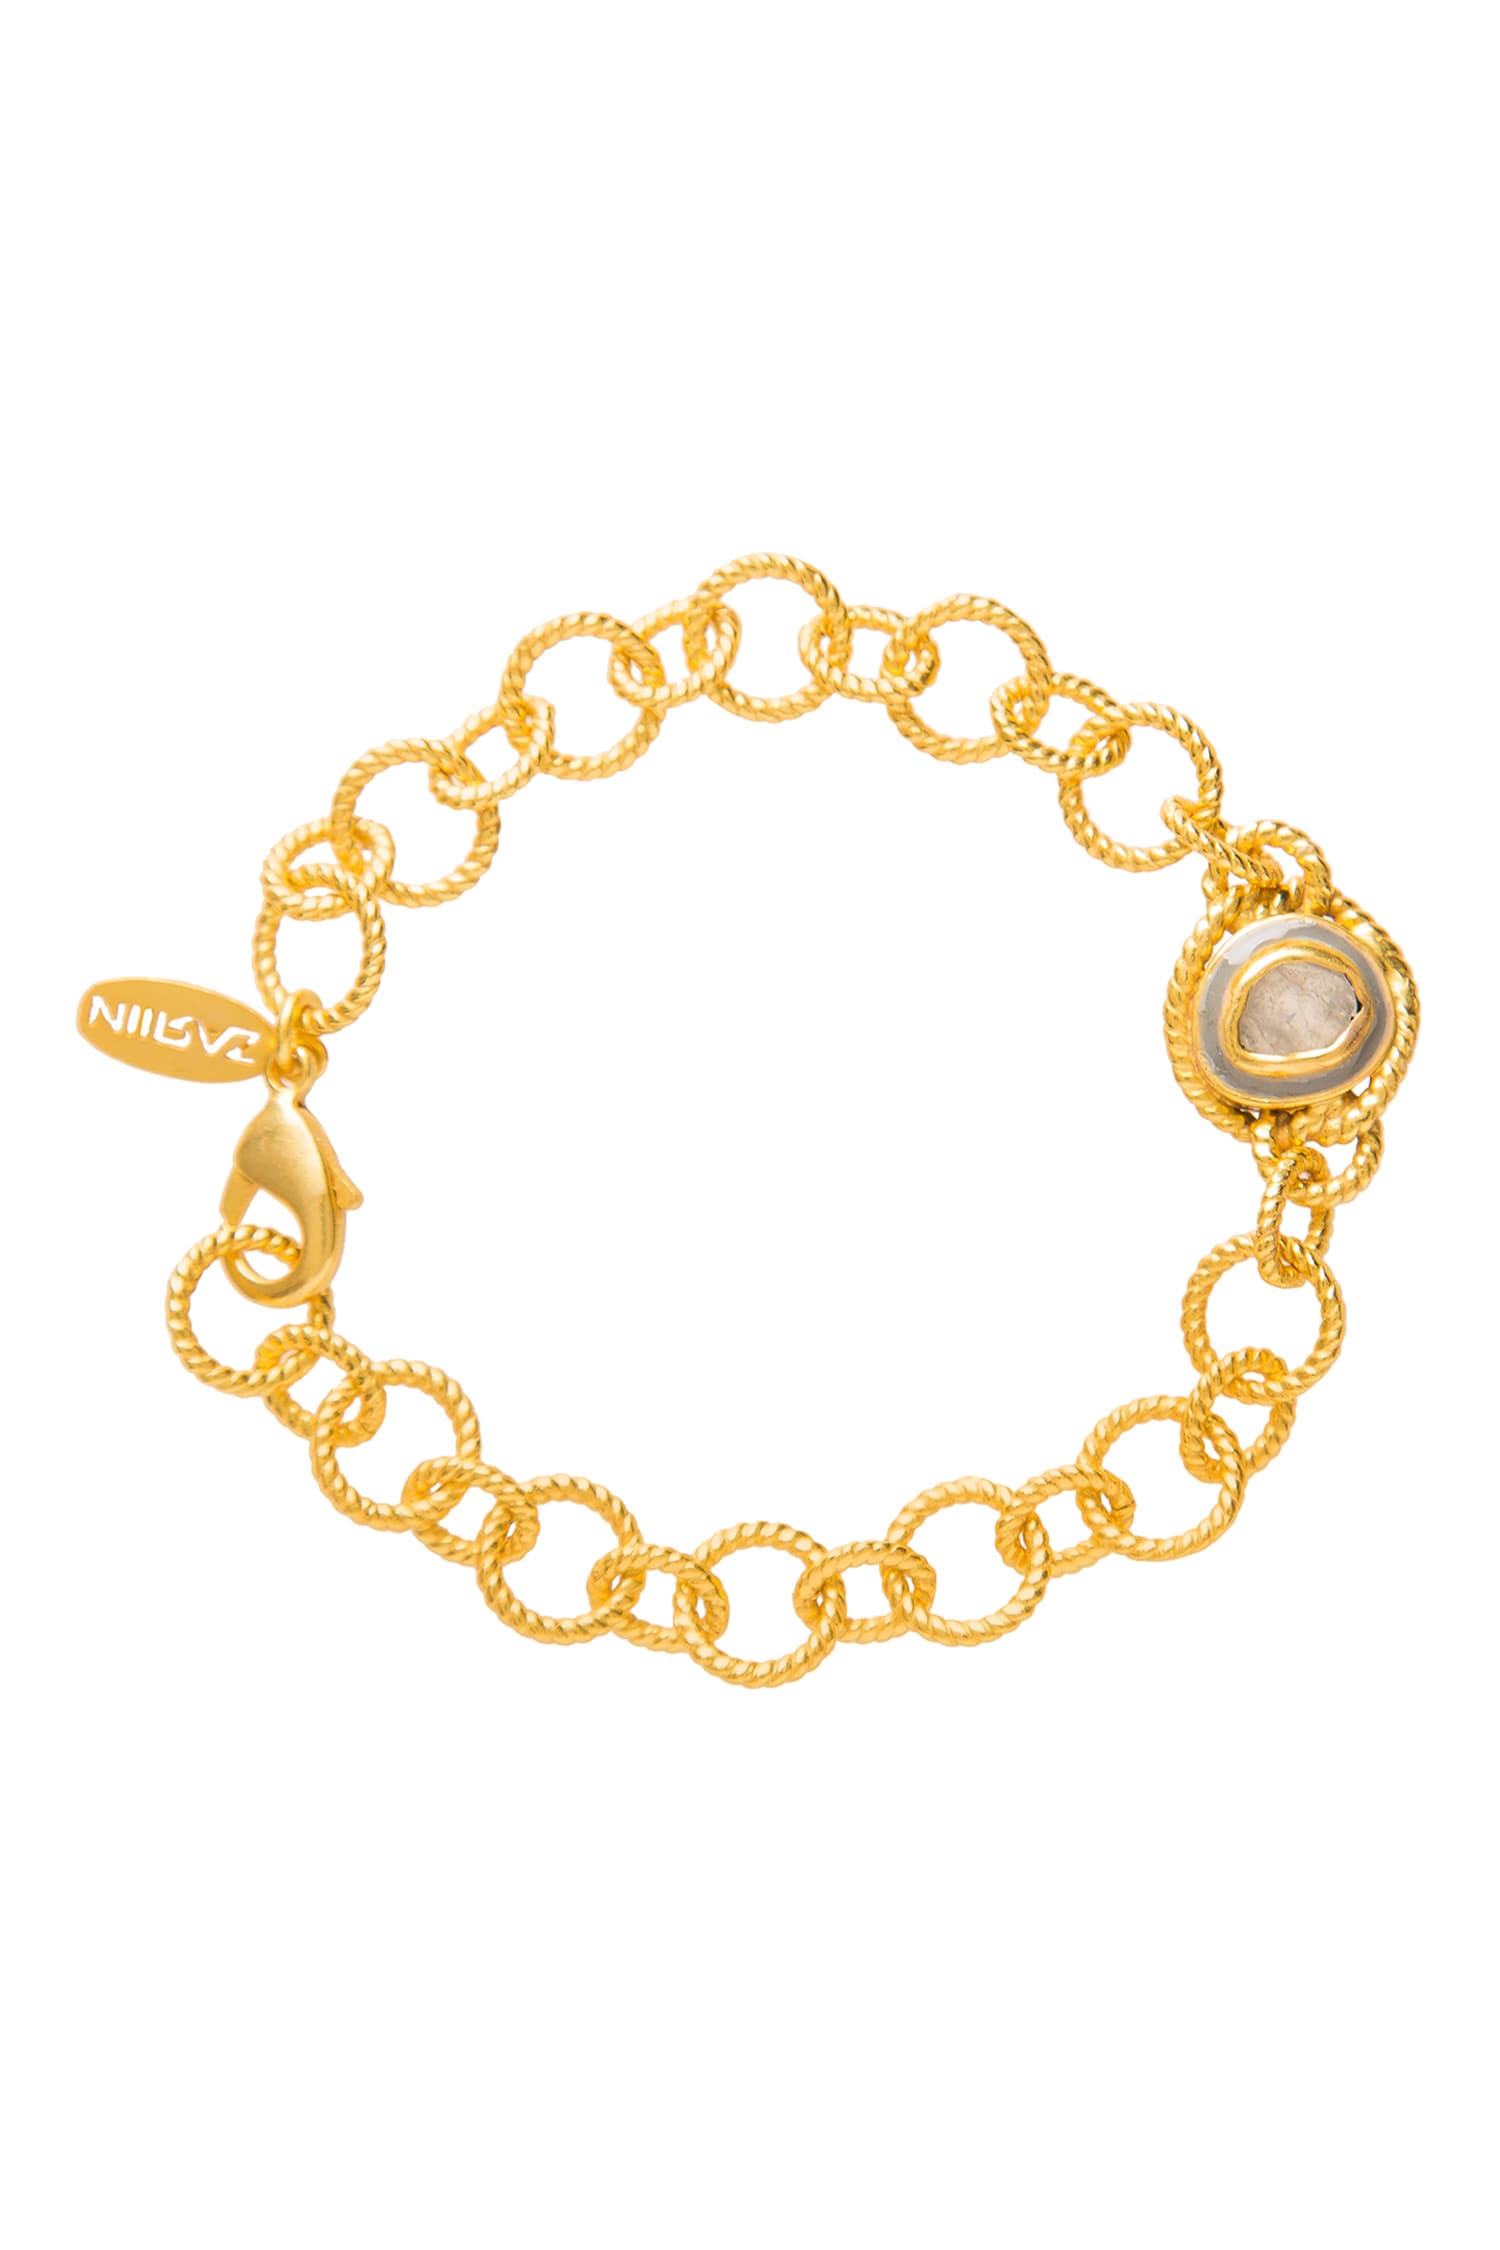 Shop Onyx Modern Begum Gold Plated Bracelet by ZARIIN at House of Designers   HOUSE OF DESIGNERS